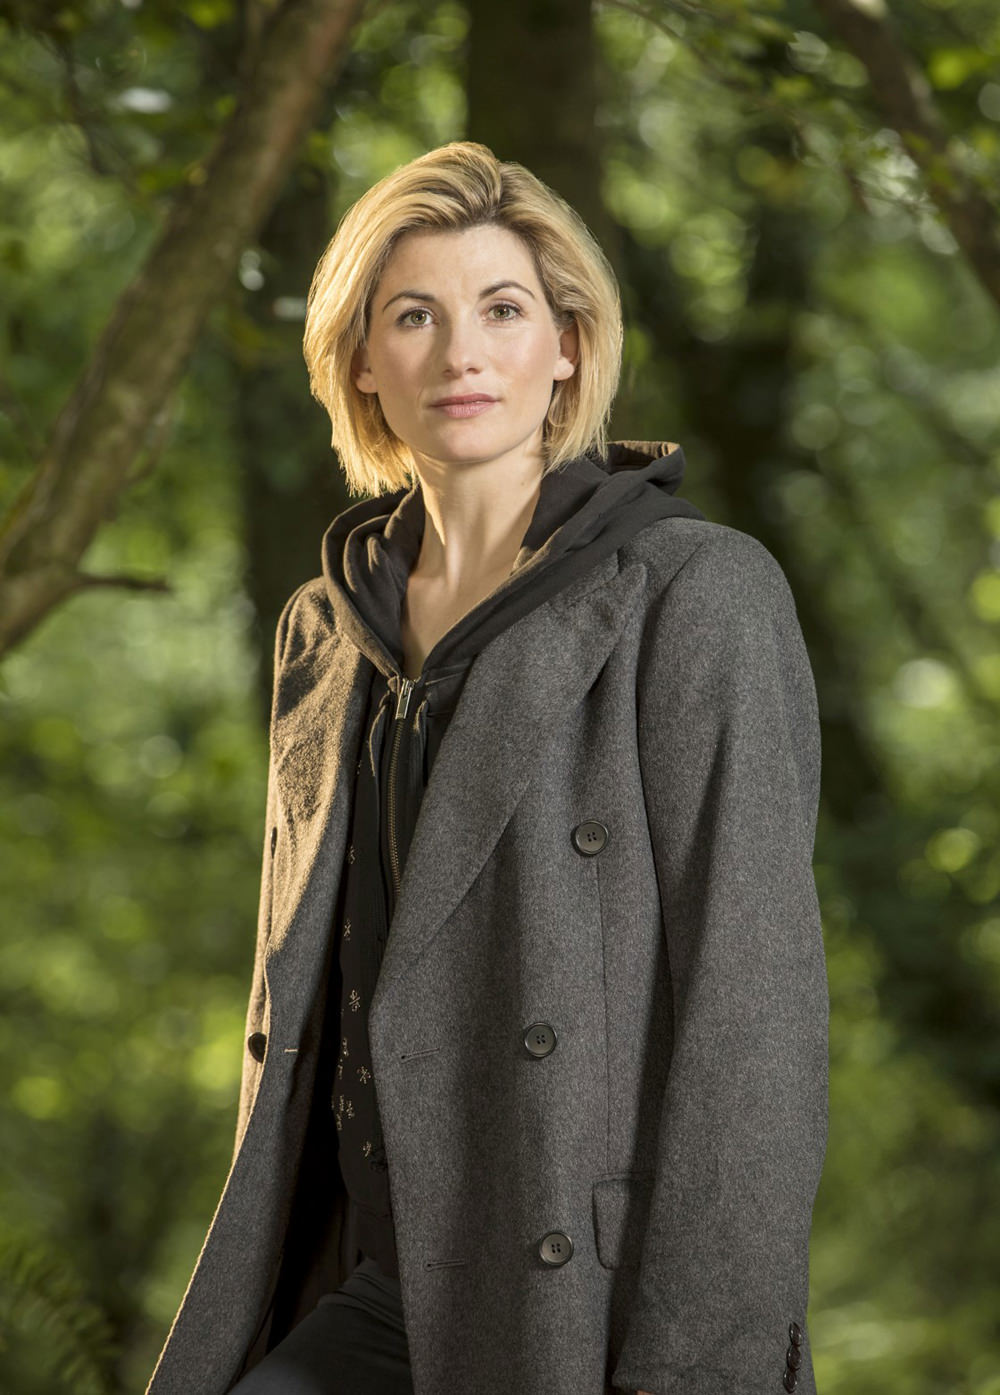 Jodie Whittaker: I want to bring inclusivity and hope to 